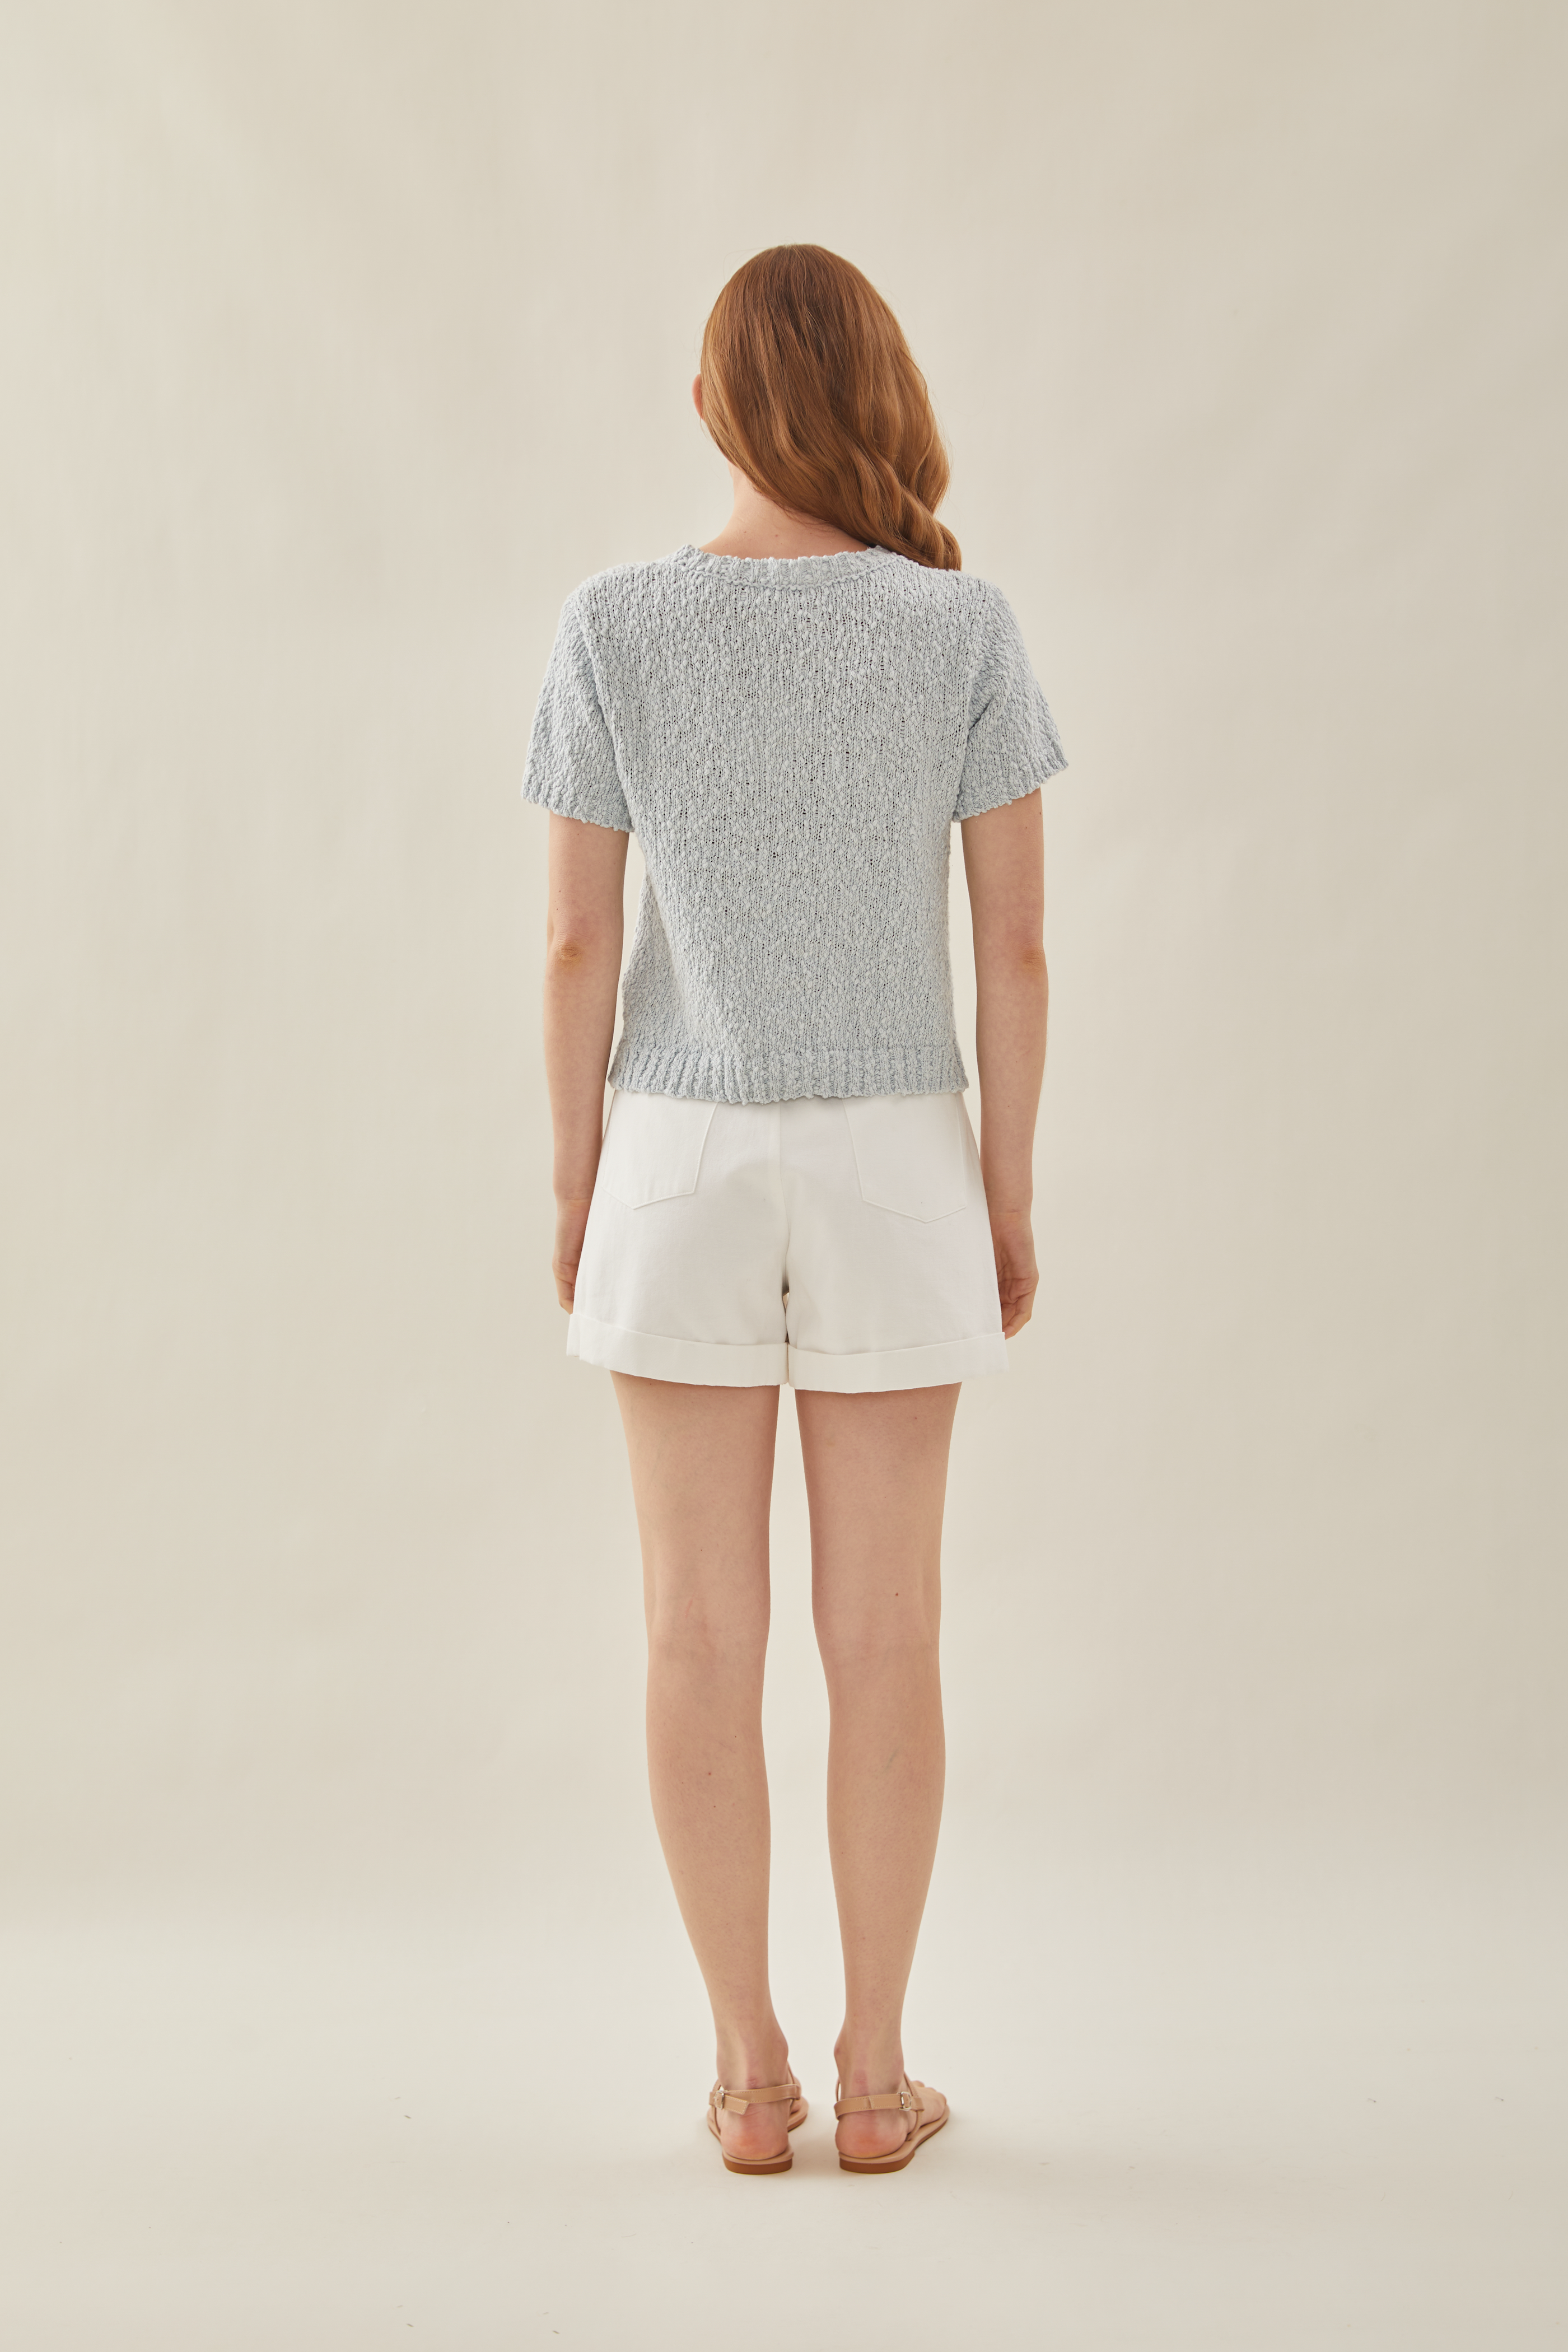 Textured Knit Top in Skylight